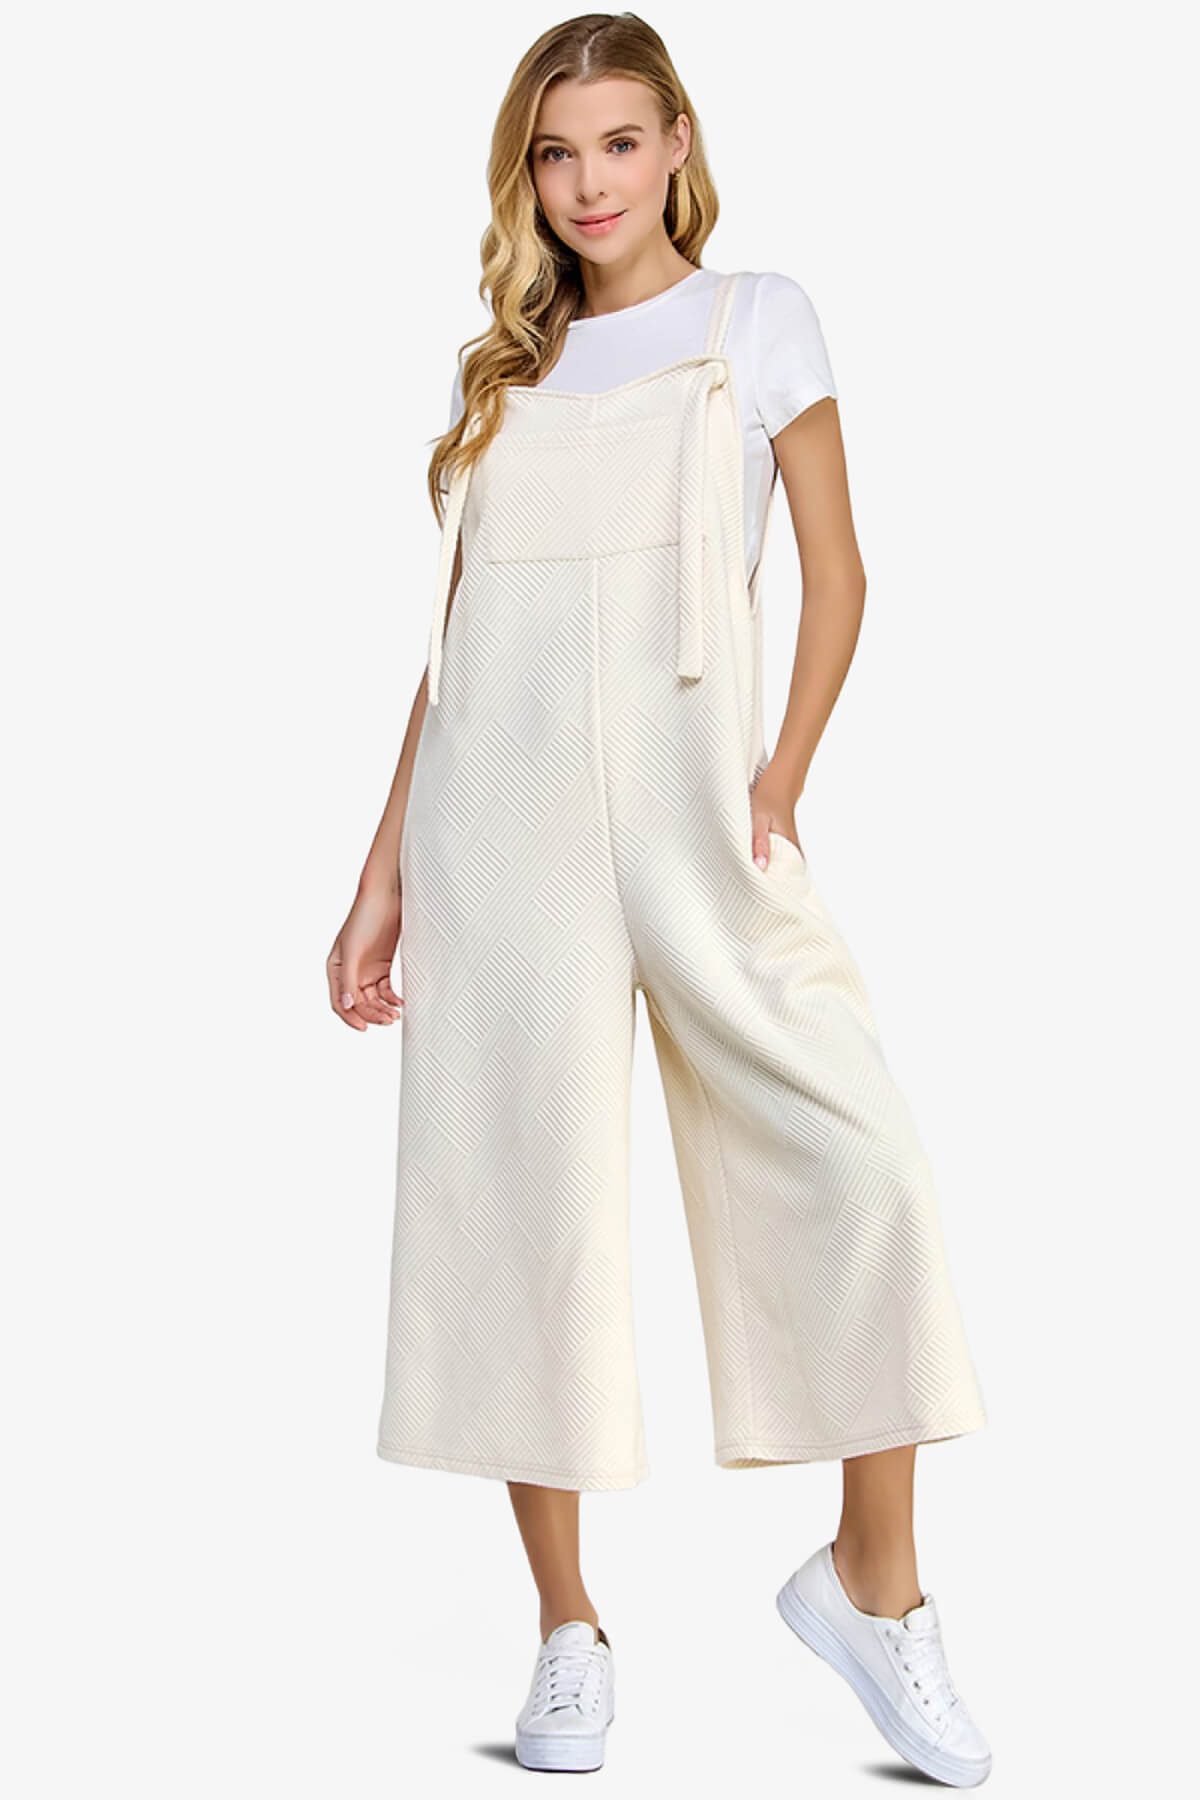 Casual Textured Crop Wide Leg Overall Loose Bib Pants Jumpsuits